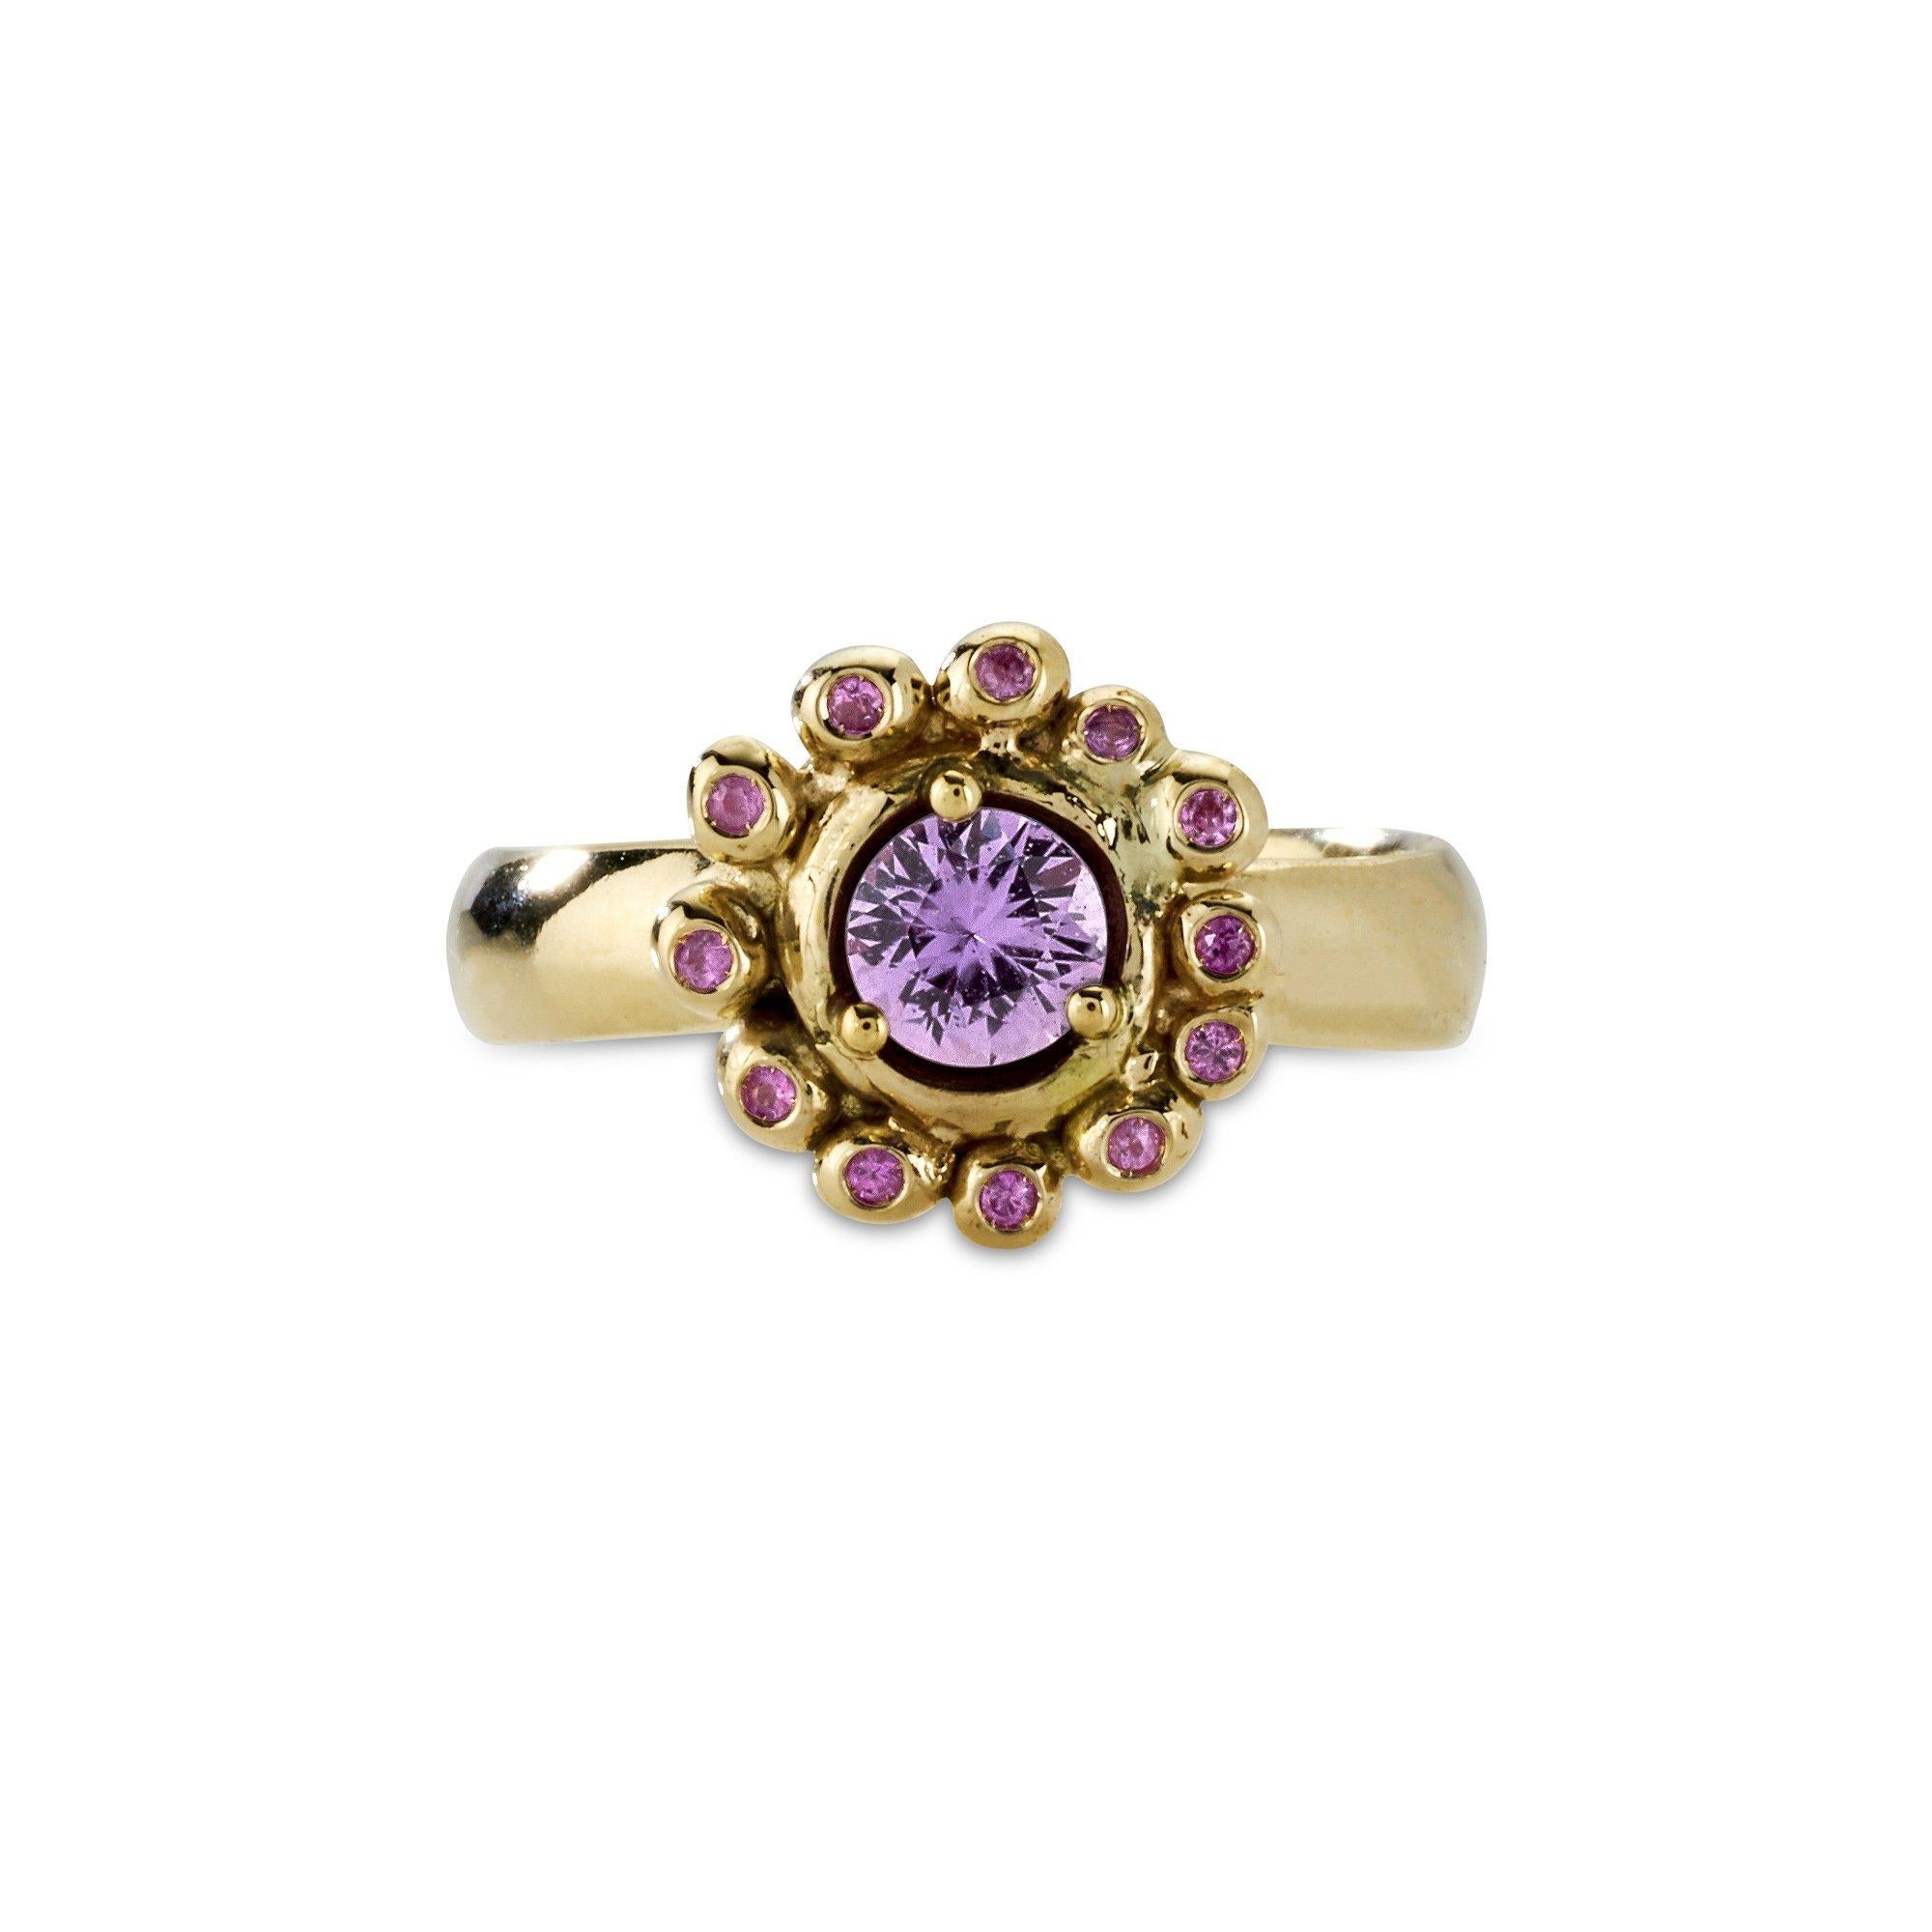 Papillon Ring, 14 Karat Yellow Gold with Australian Purple and Pink Sapphires
Handcrafted and individually cast in solid gold. Olivia carves each piece from wax, making these items unique, which we believe is what gives them their beauty. The